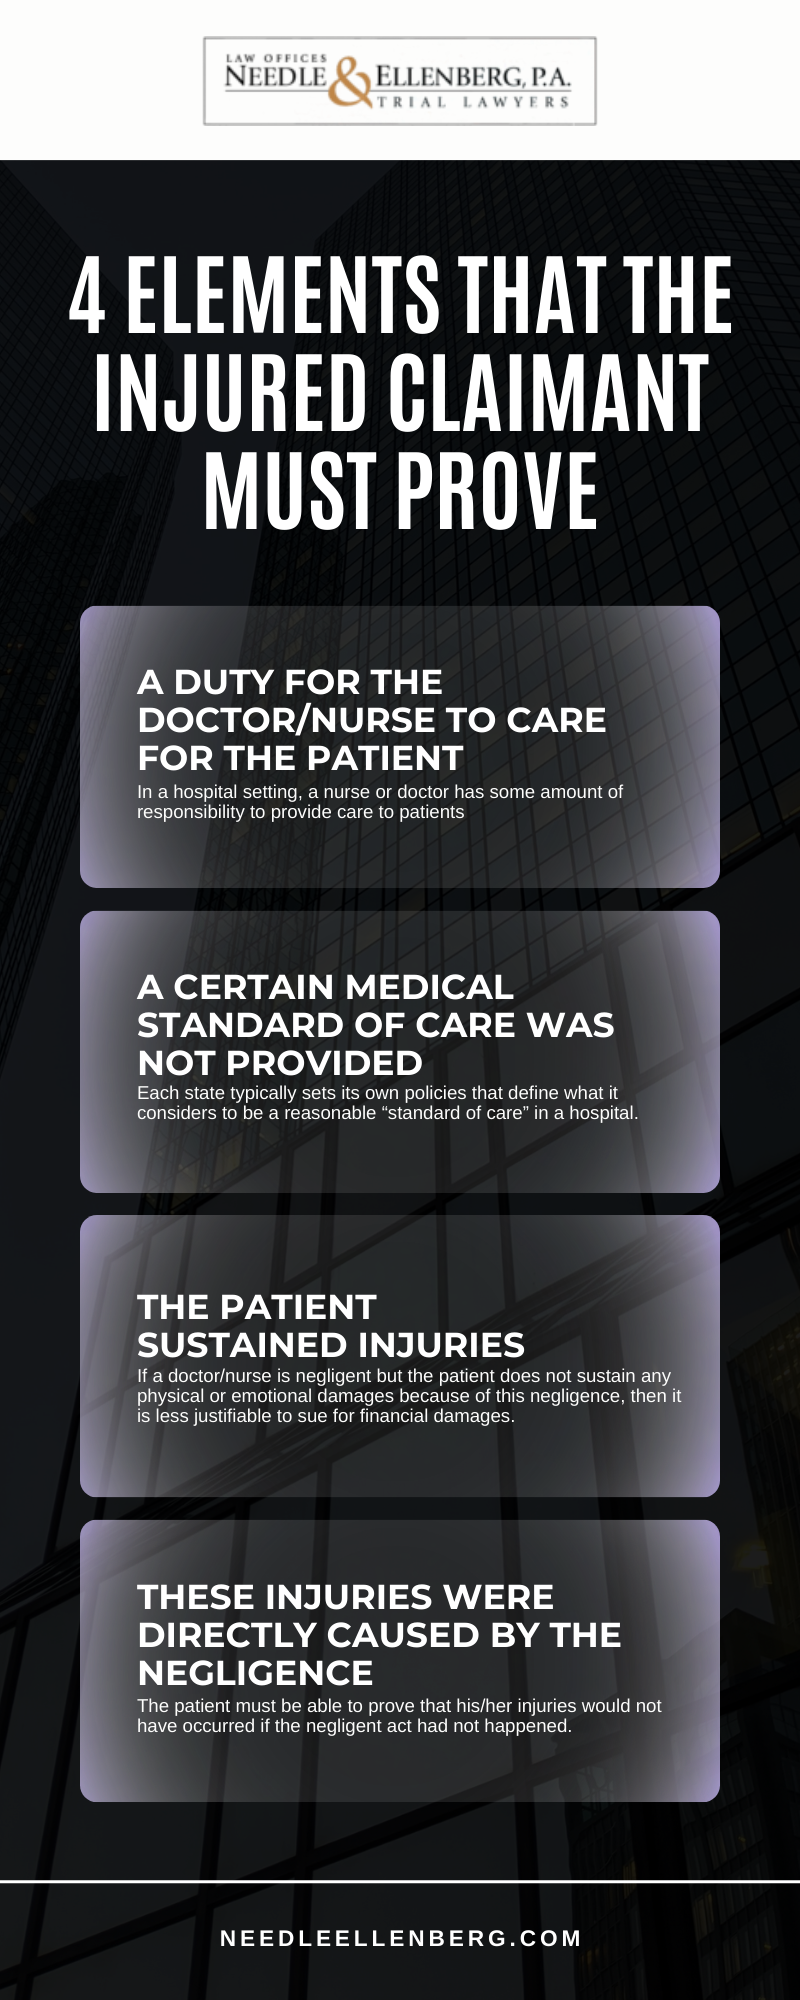 4 Elements That The Injured Claimant Must Prove Infographic